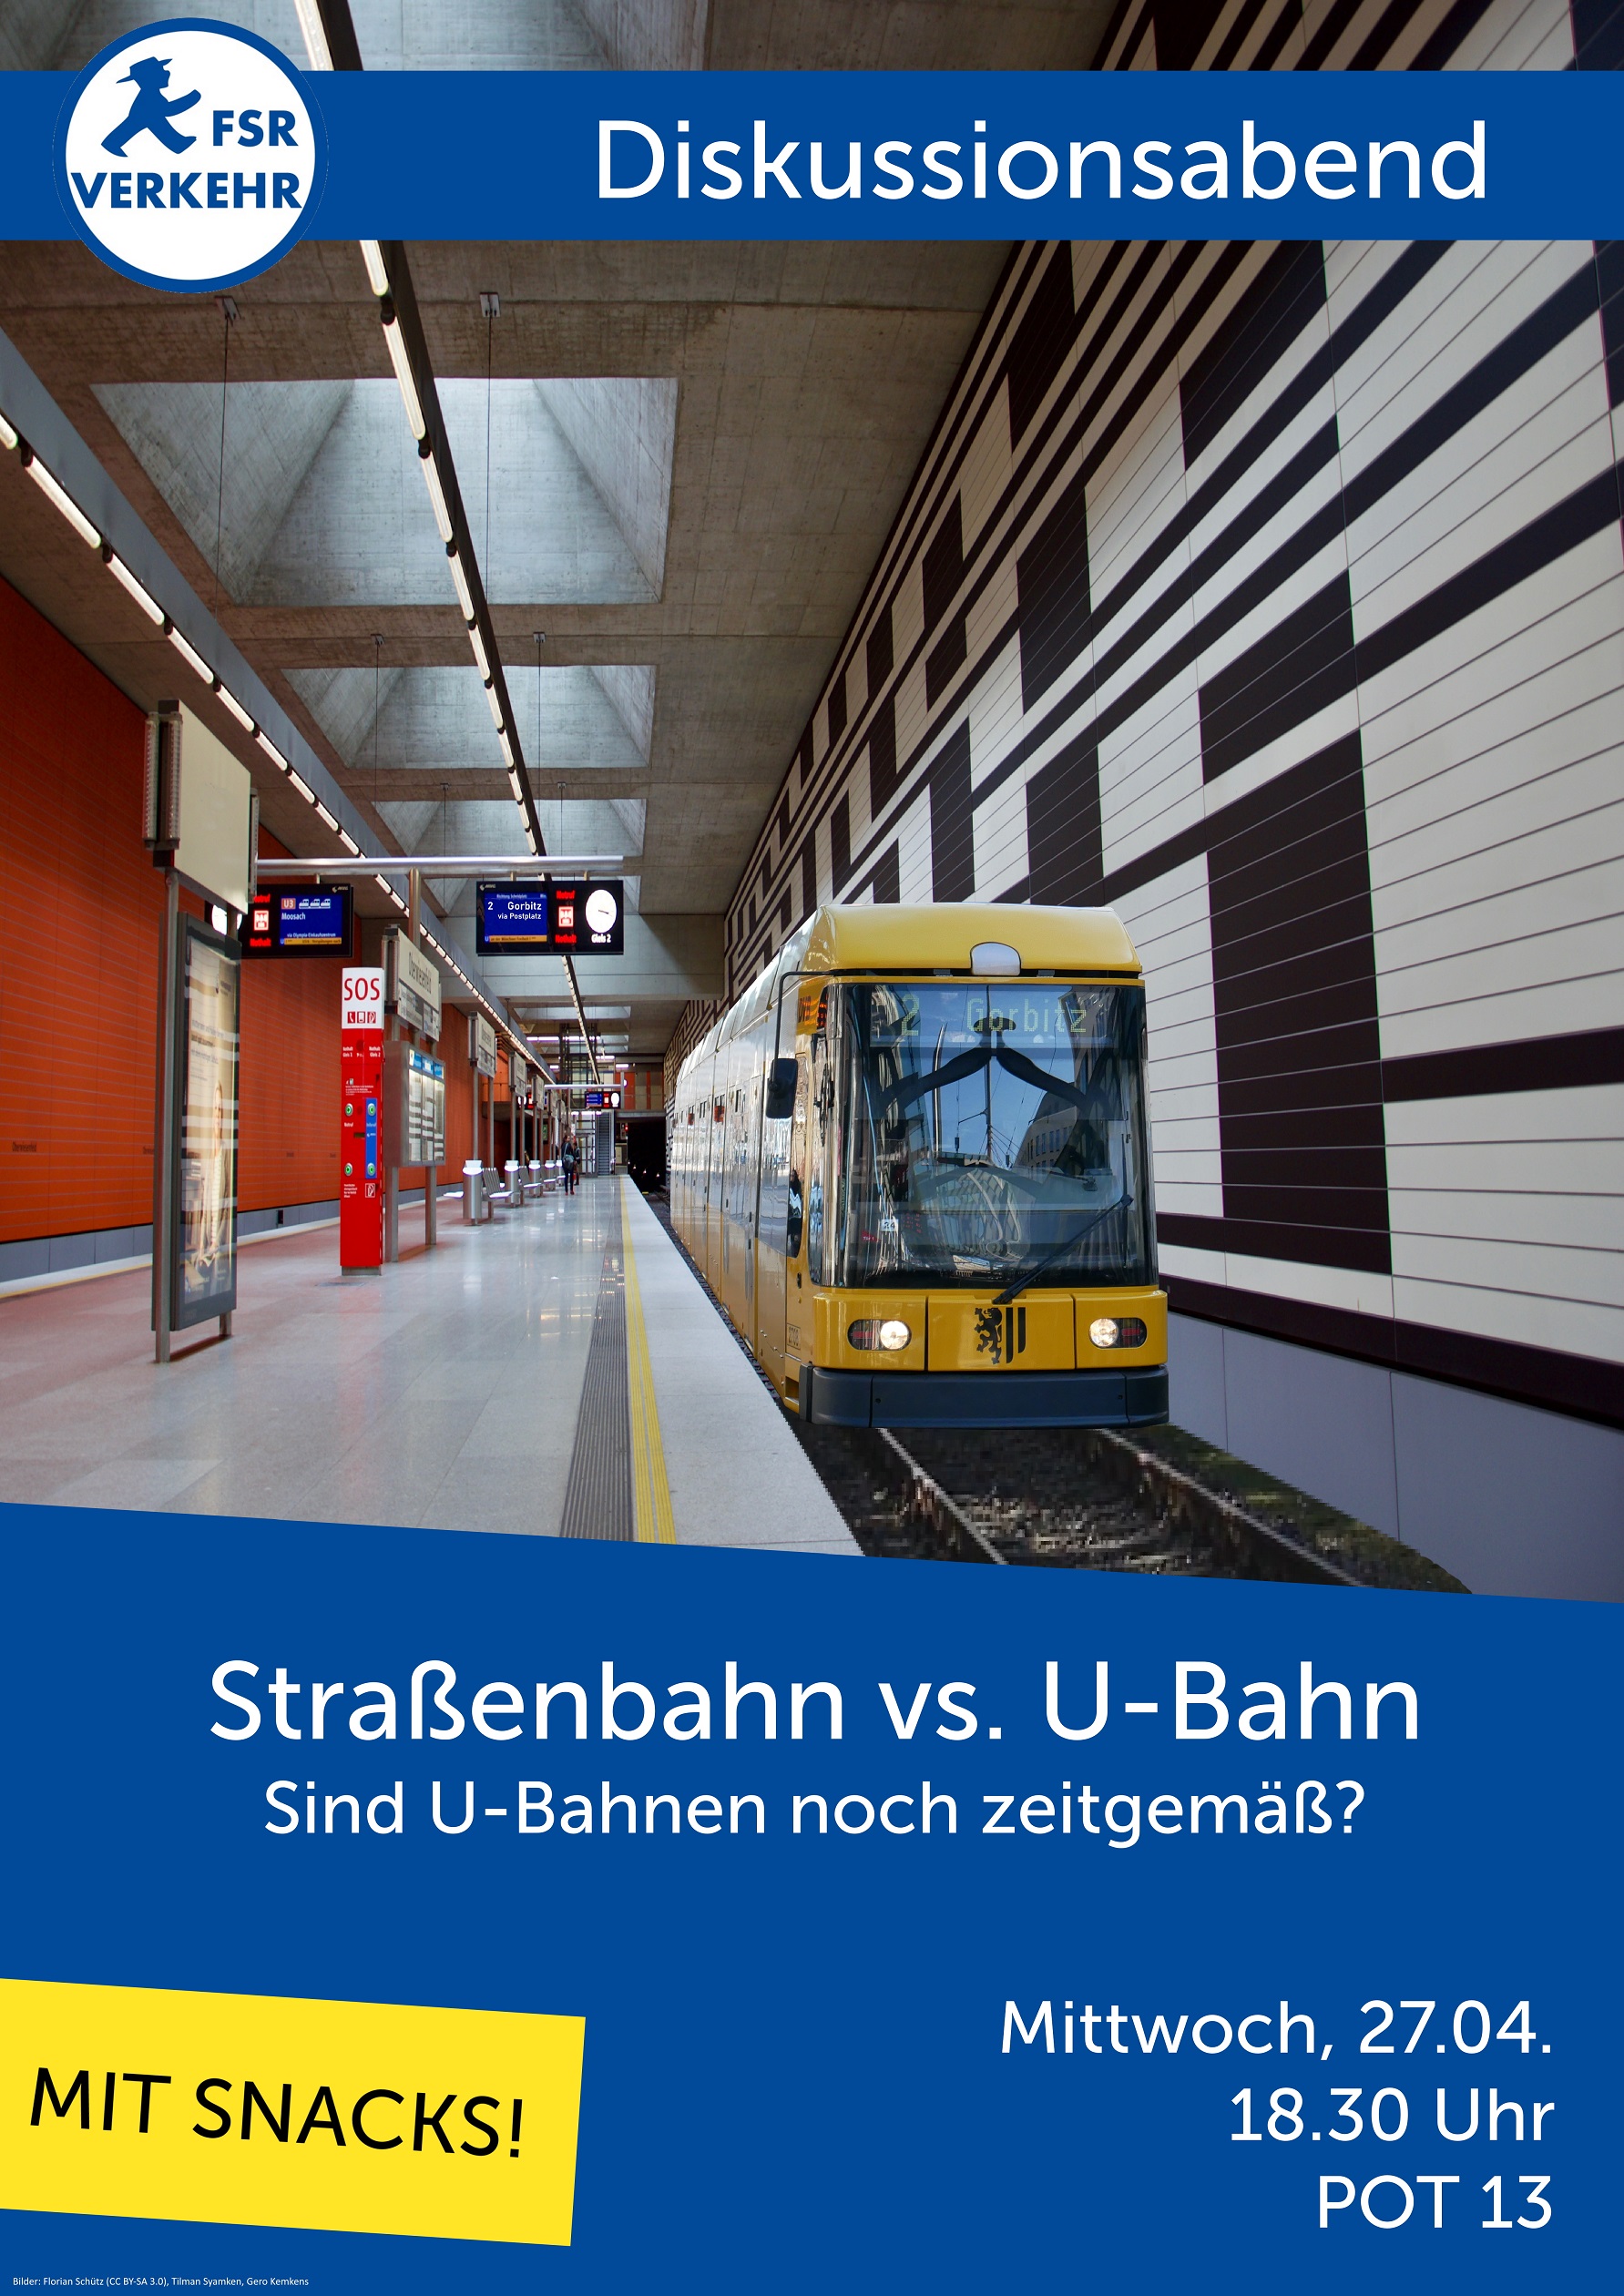 Discussion evening: “Tram vs. metro – Are metros still up to date?”